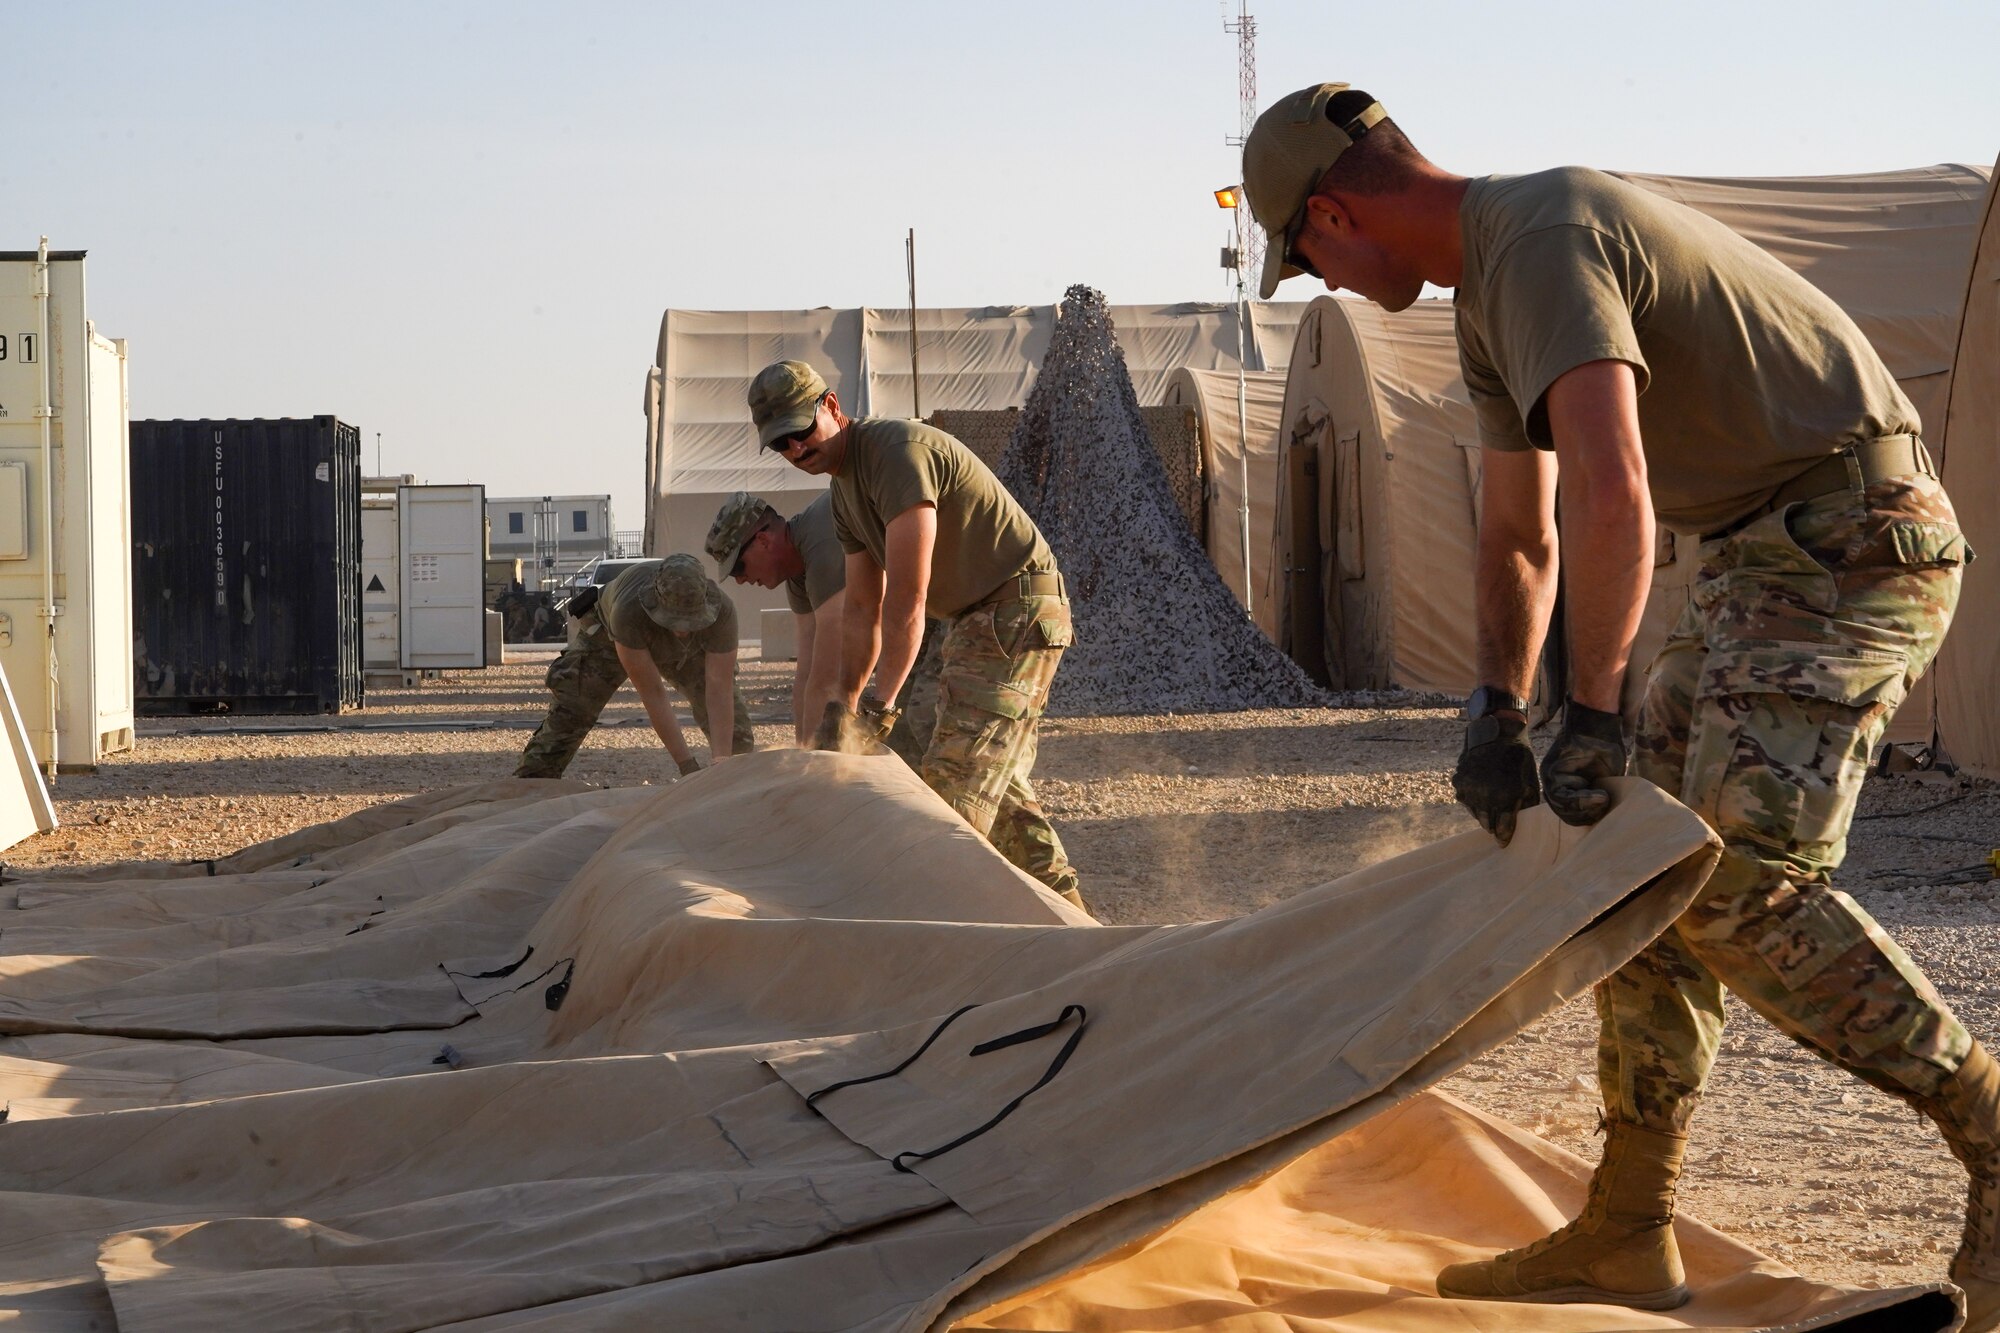 378th ECES disassemble tents as part of base improvement plan